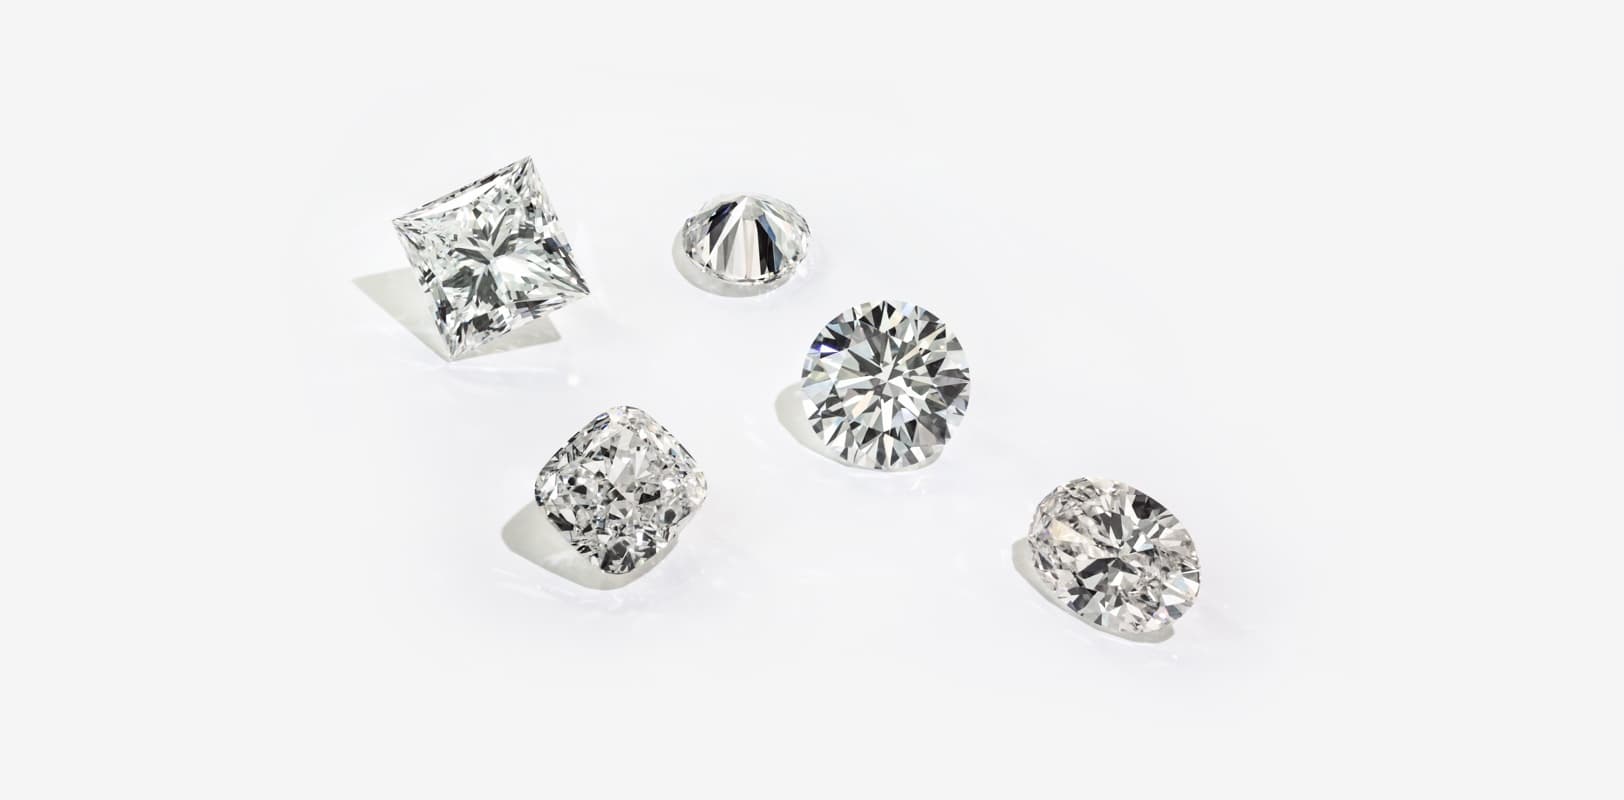 Lab-grown diamonds in different shapes and sizes